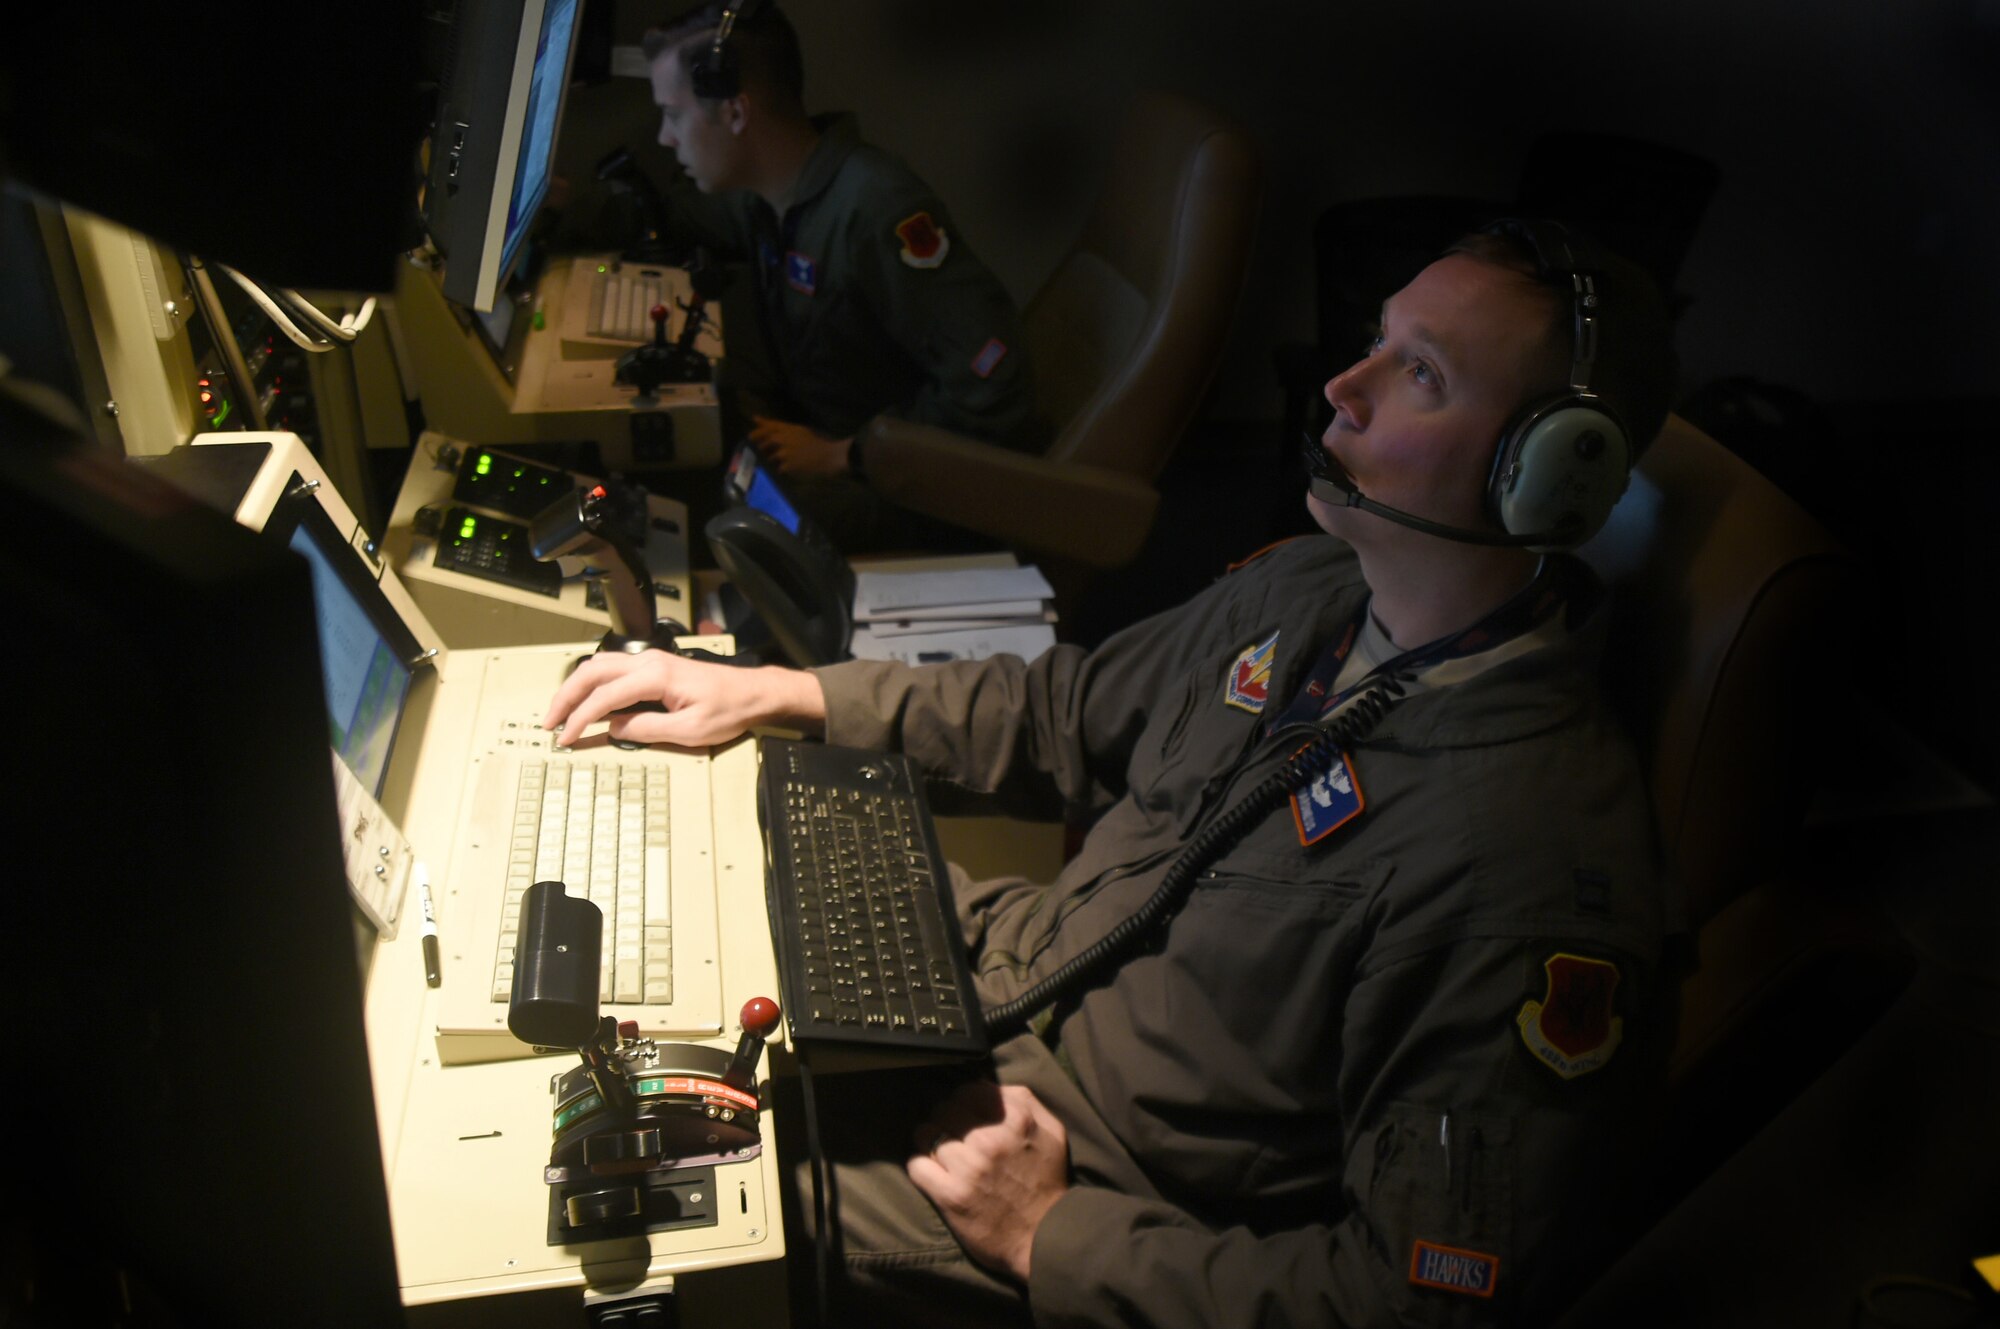 (Left) Staff Sgt. Lloyd, 18th Reconnaissance Squadron MQ-1 Predator sensor operator and Capt. Benjamin, 18th RS MQ-1 Predator pilot (right), fly a remotely piloted aircraft training sortie in support of Red Flag 15-3 at Creech Air Force Base, Nevada on July 23, 2015. The goal of participating in Red Flag exercises is to fully integrate RPAs into large force exercises (LFEs), to include educating other major weapon systems (MWS) communities on the RPA capabilities to enable mission essential support for war planners. (U.S. Air Force photo by Tech. Sgt. Nadine Barclay)